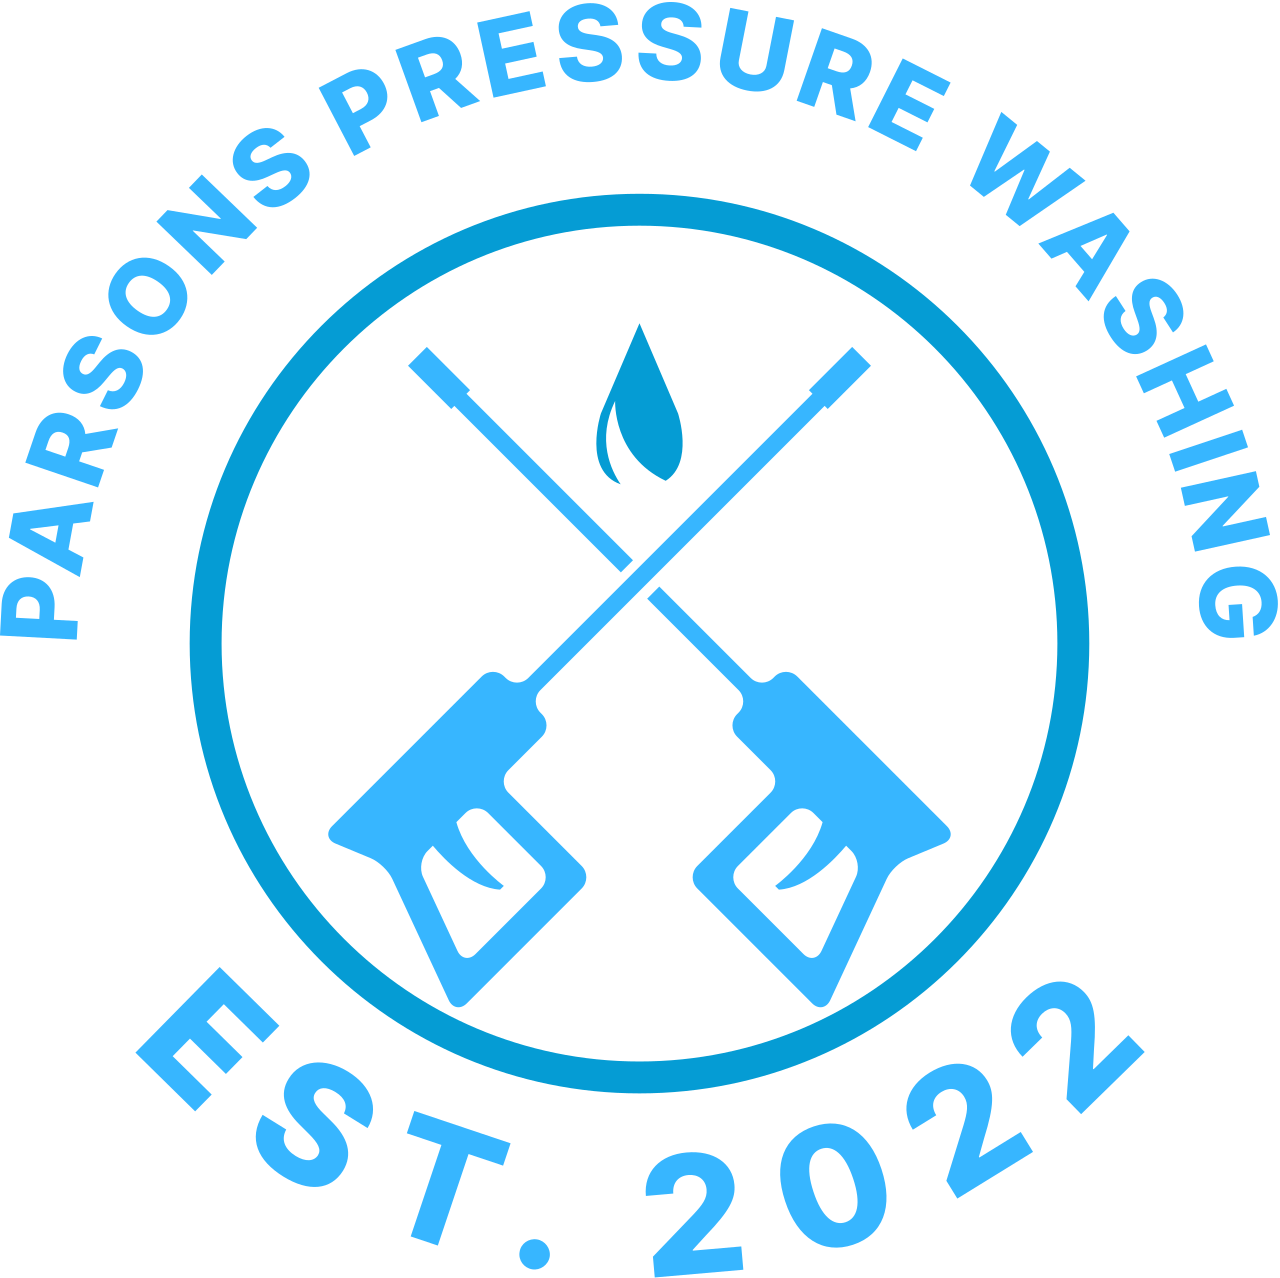 PARSONS PRESSURE WASHING's web page